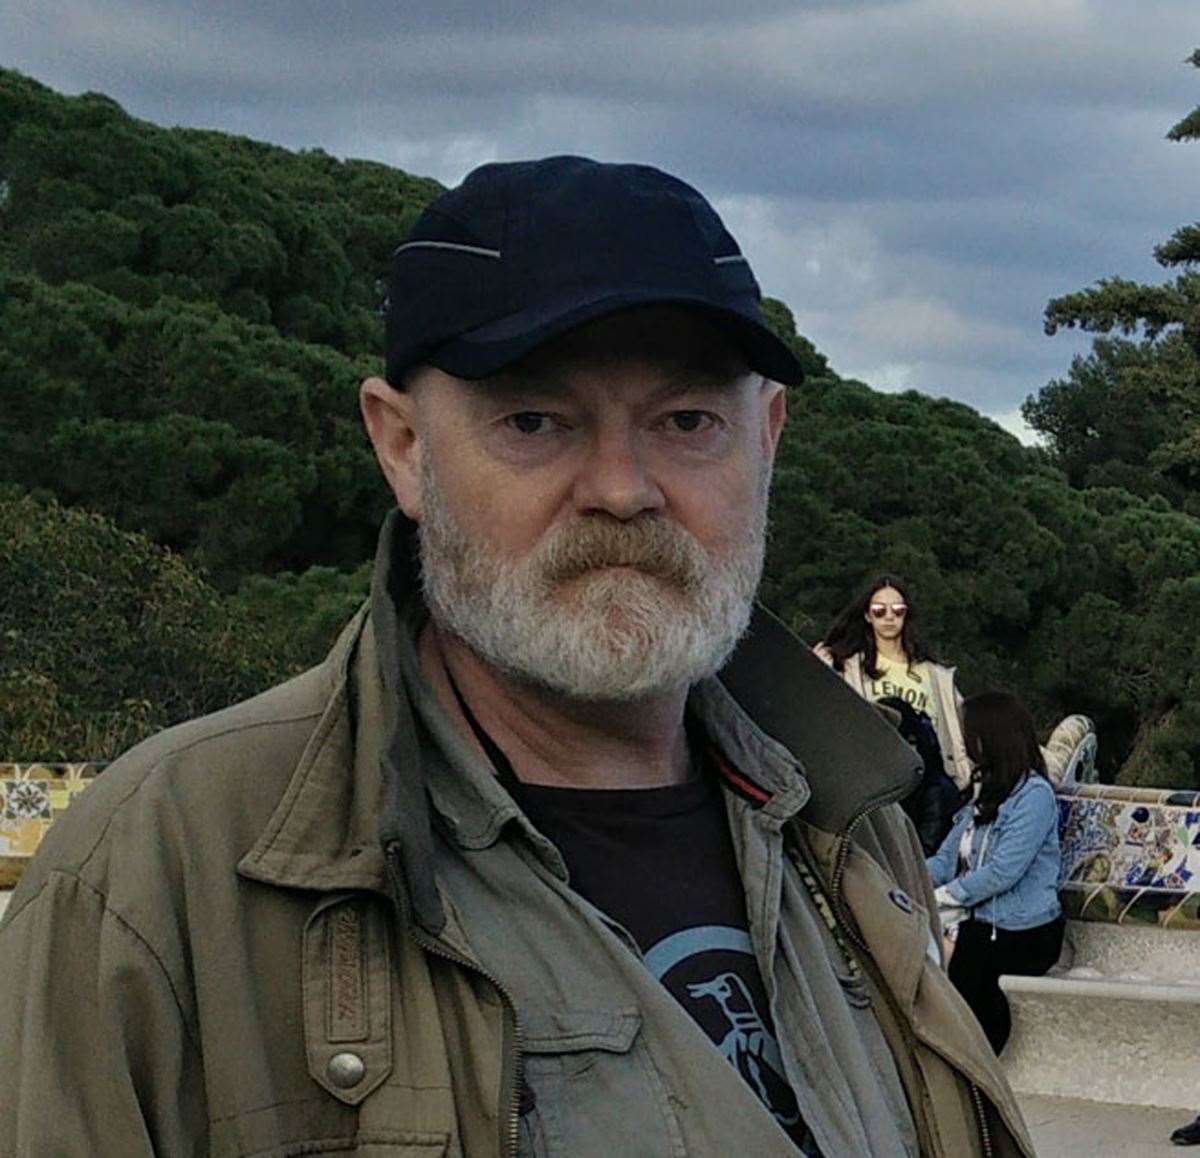 David Hutchison, who was brought up in Lochinver, is set to release his first historical crime novel the Book of Skulls this summer.